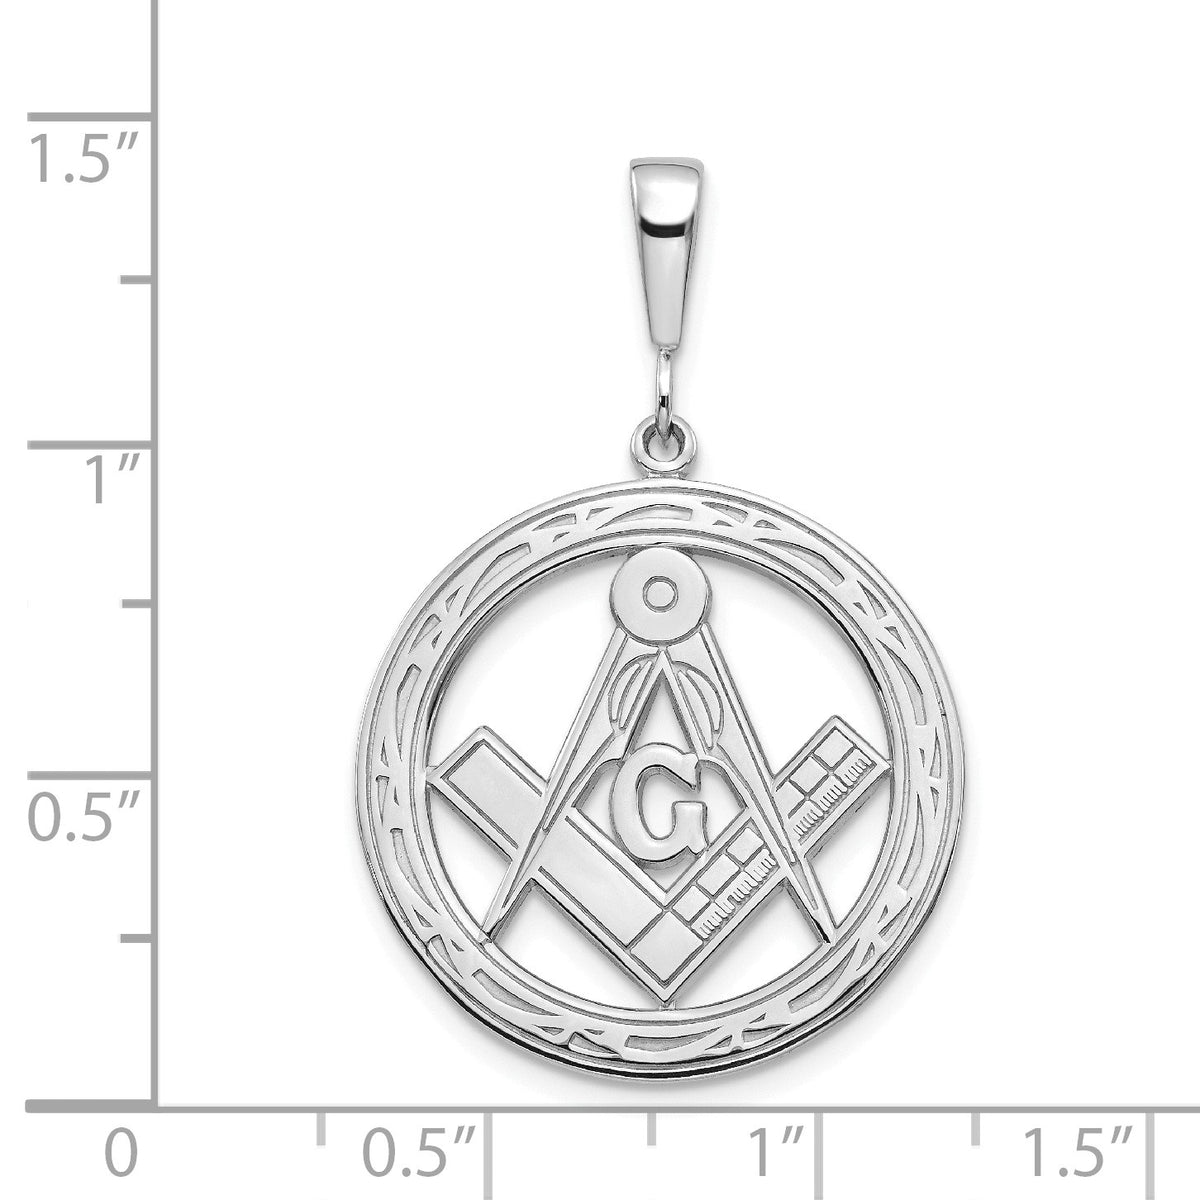 Alternate view of the 14k White Gold Masonic Circle Pendant, 18mm or 23mm by The Black Bow Jewelry Co.